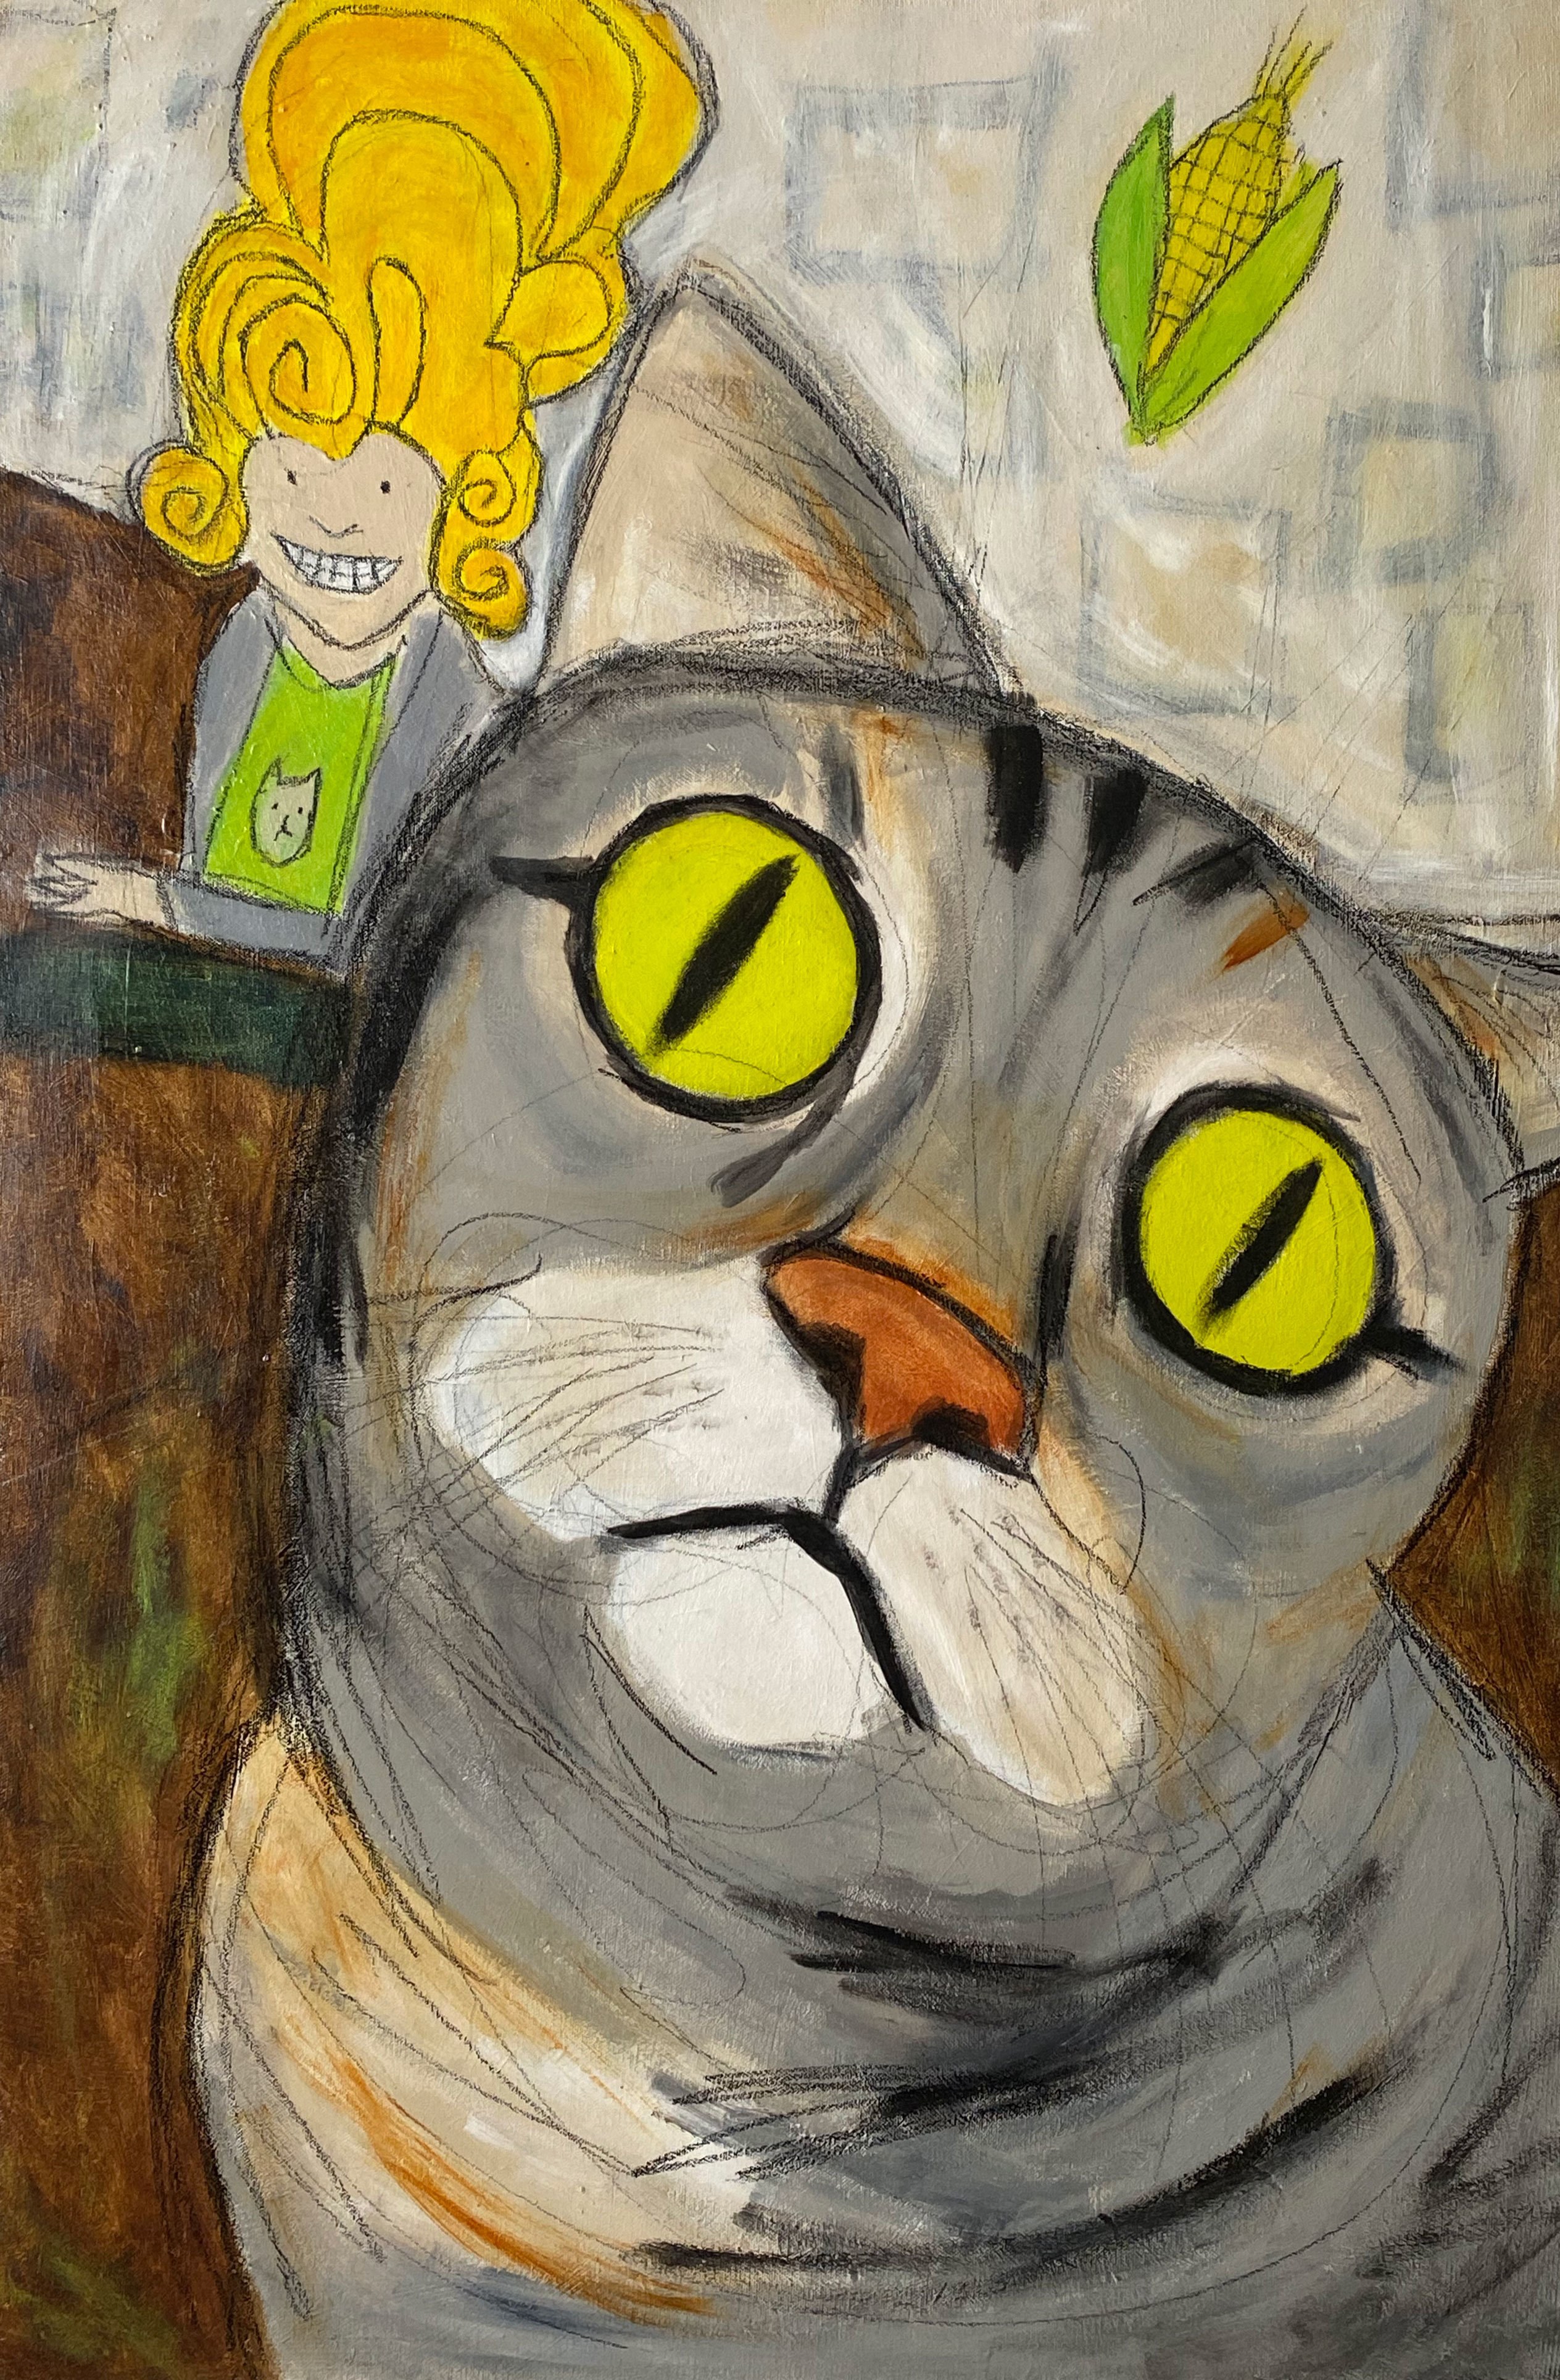 Painting of a gray tabby cat with big eyes. An ear of corn floats above her head, and a woman in a giant yellow wig sits behind her.